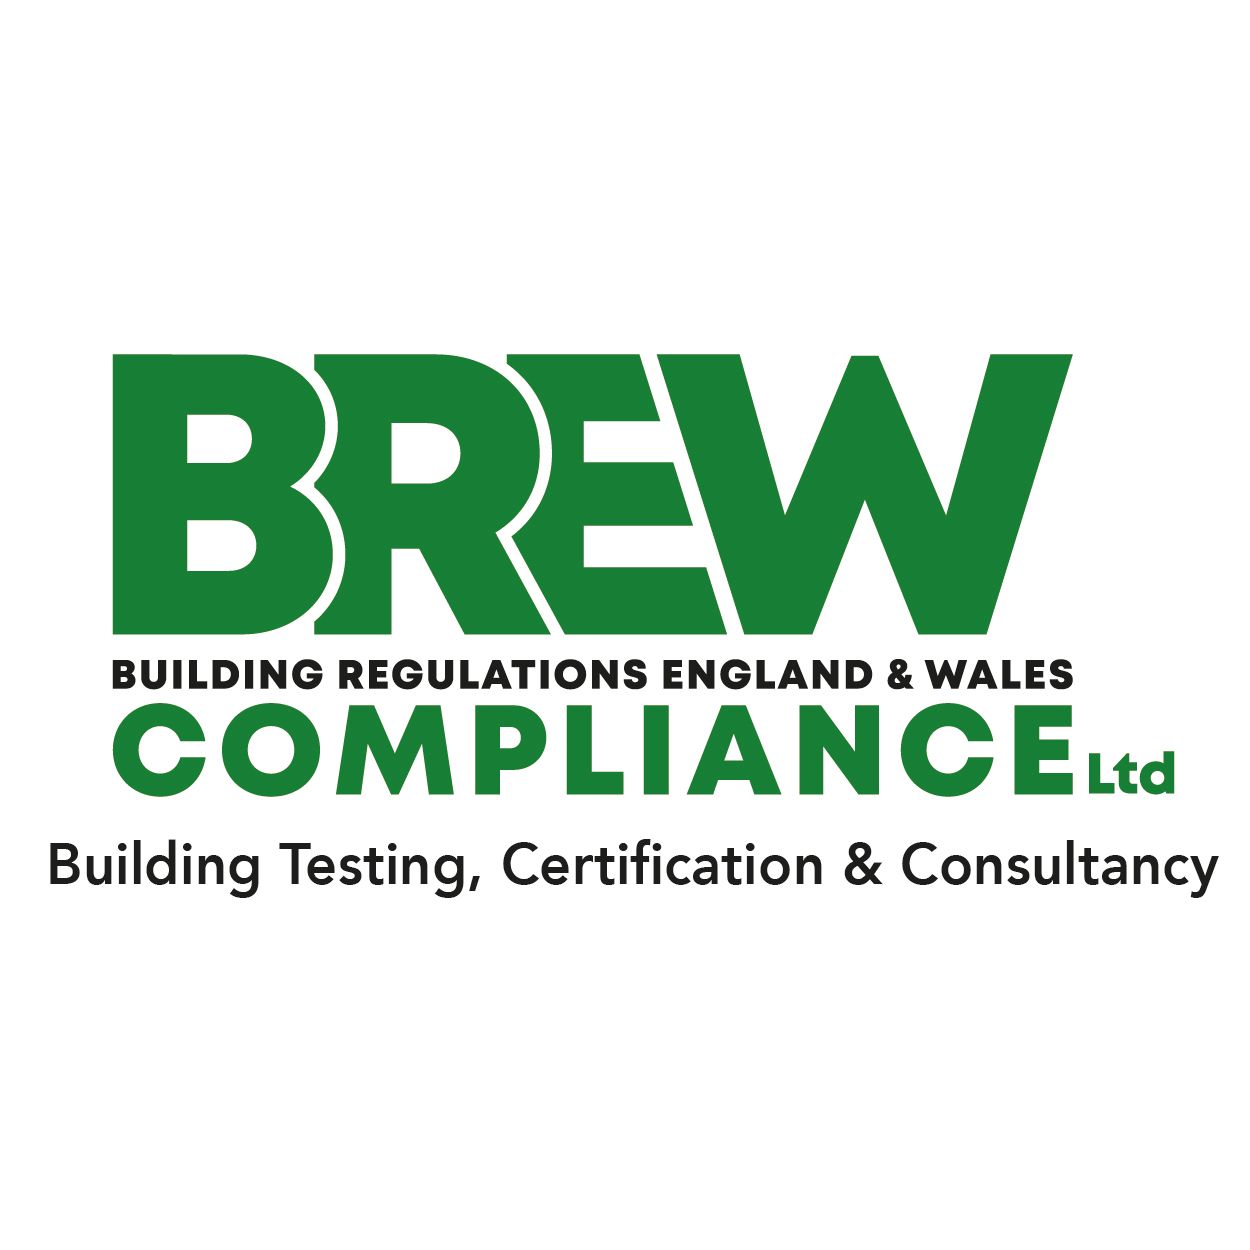 BREW Compliance Limited